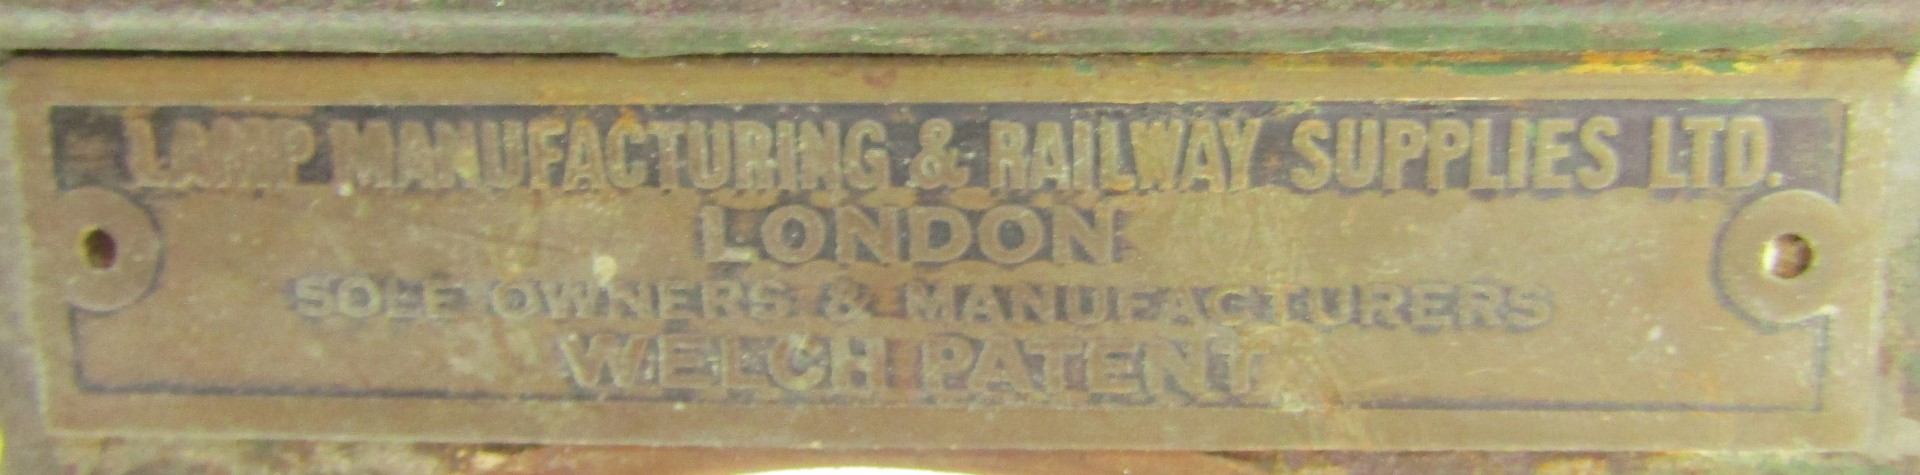 A Lamp Manufacturing and Railway Services Ltd London railway lantern, BR(E), registration number 711 - Image 3 of 4